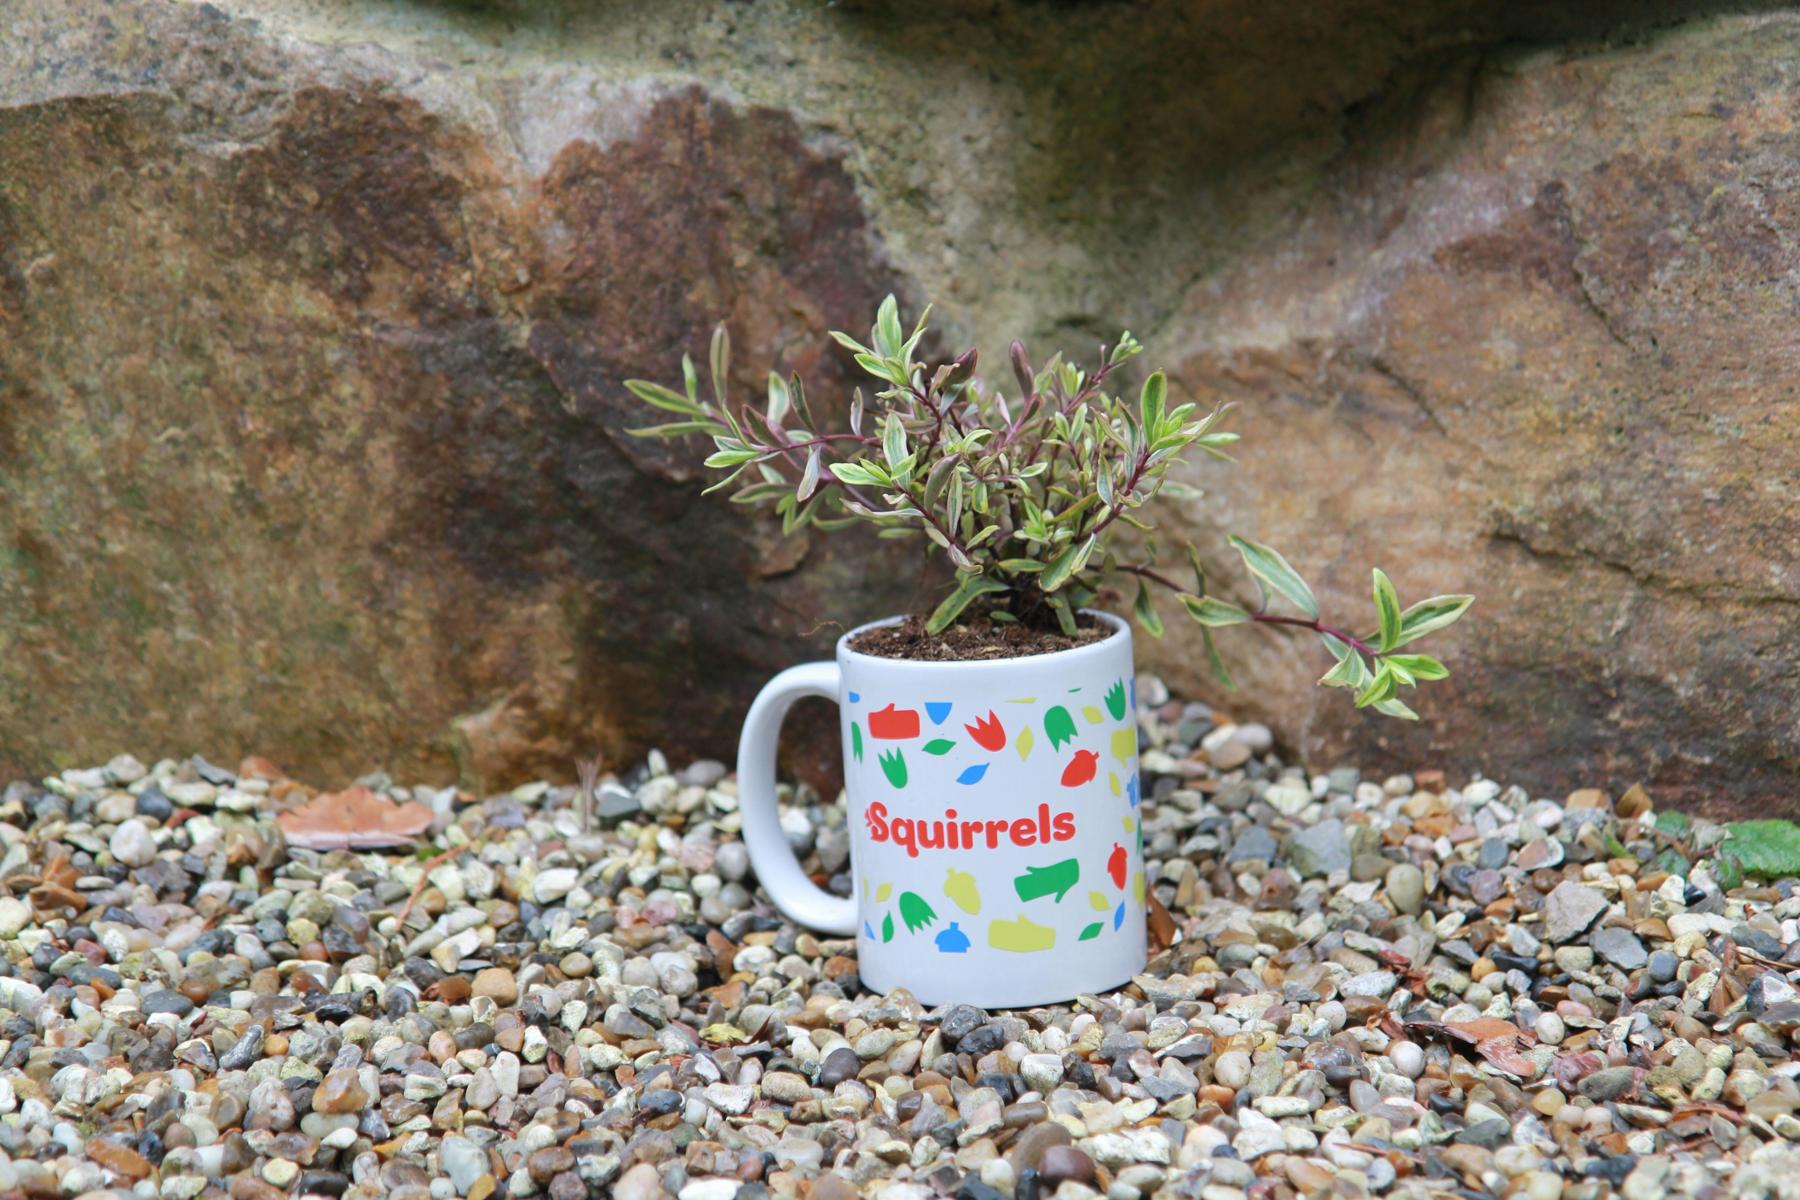 A white mug with the red Squirrels logo on and brightly coloured shapes is on a pebble path. It has been filled to the brim with soil and has a purple and green, leafy plant growing out of it.